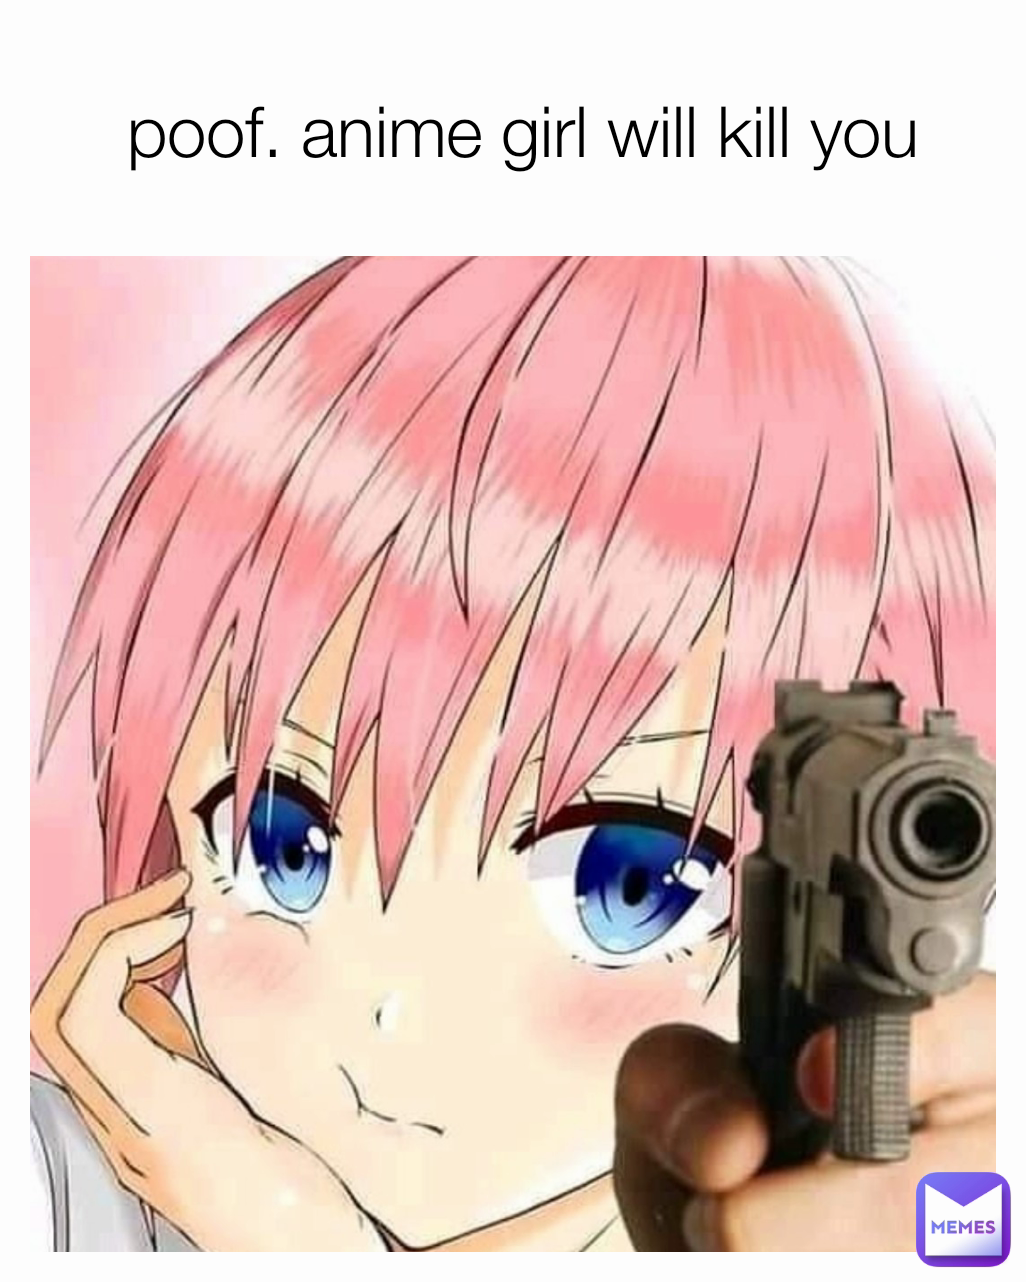  poof. anime girl will kill you